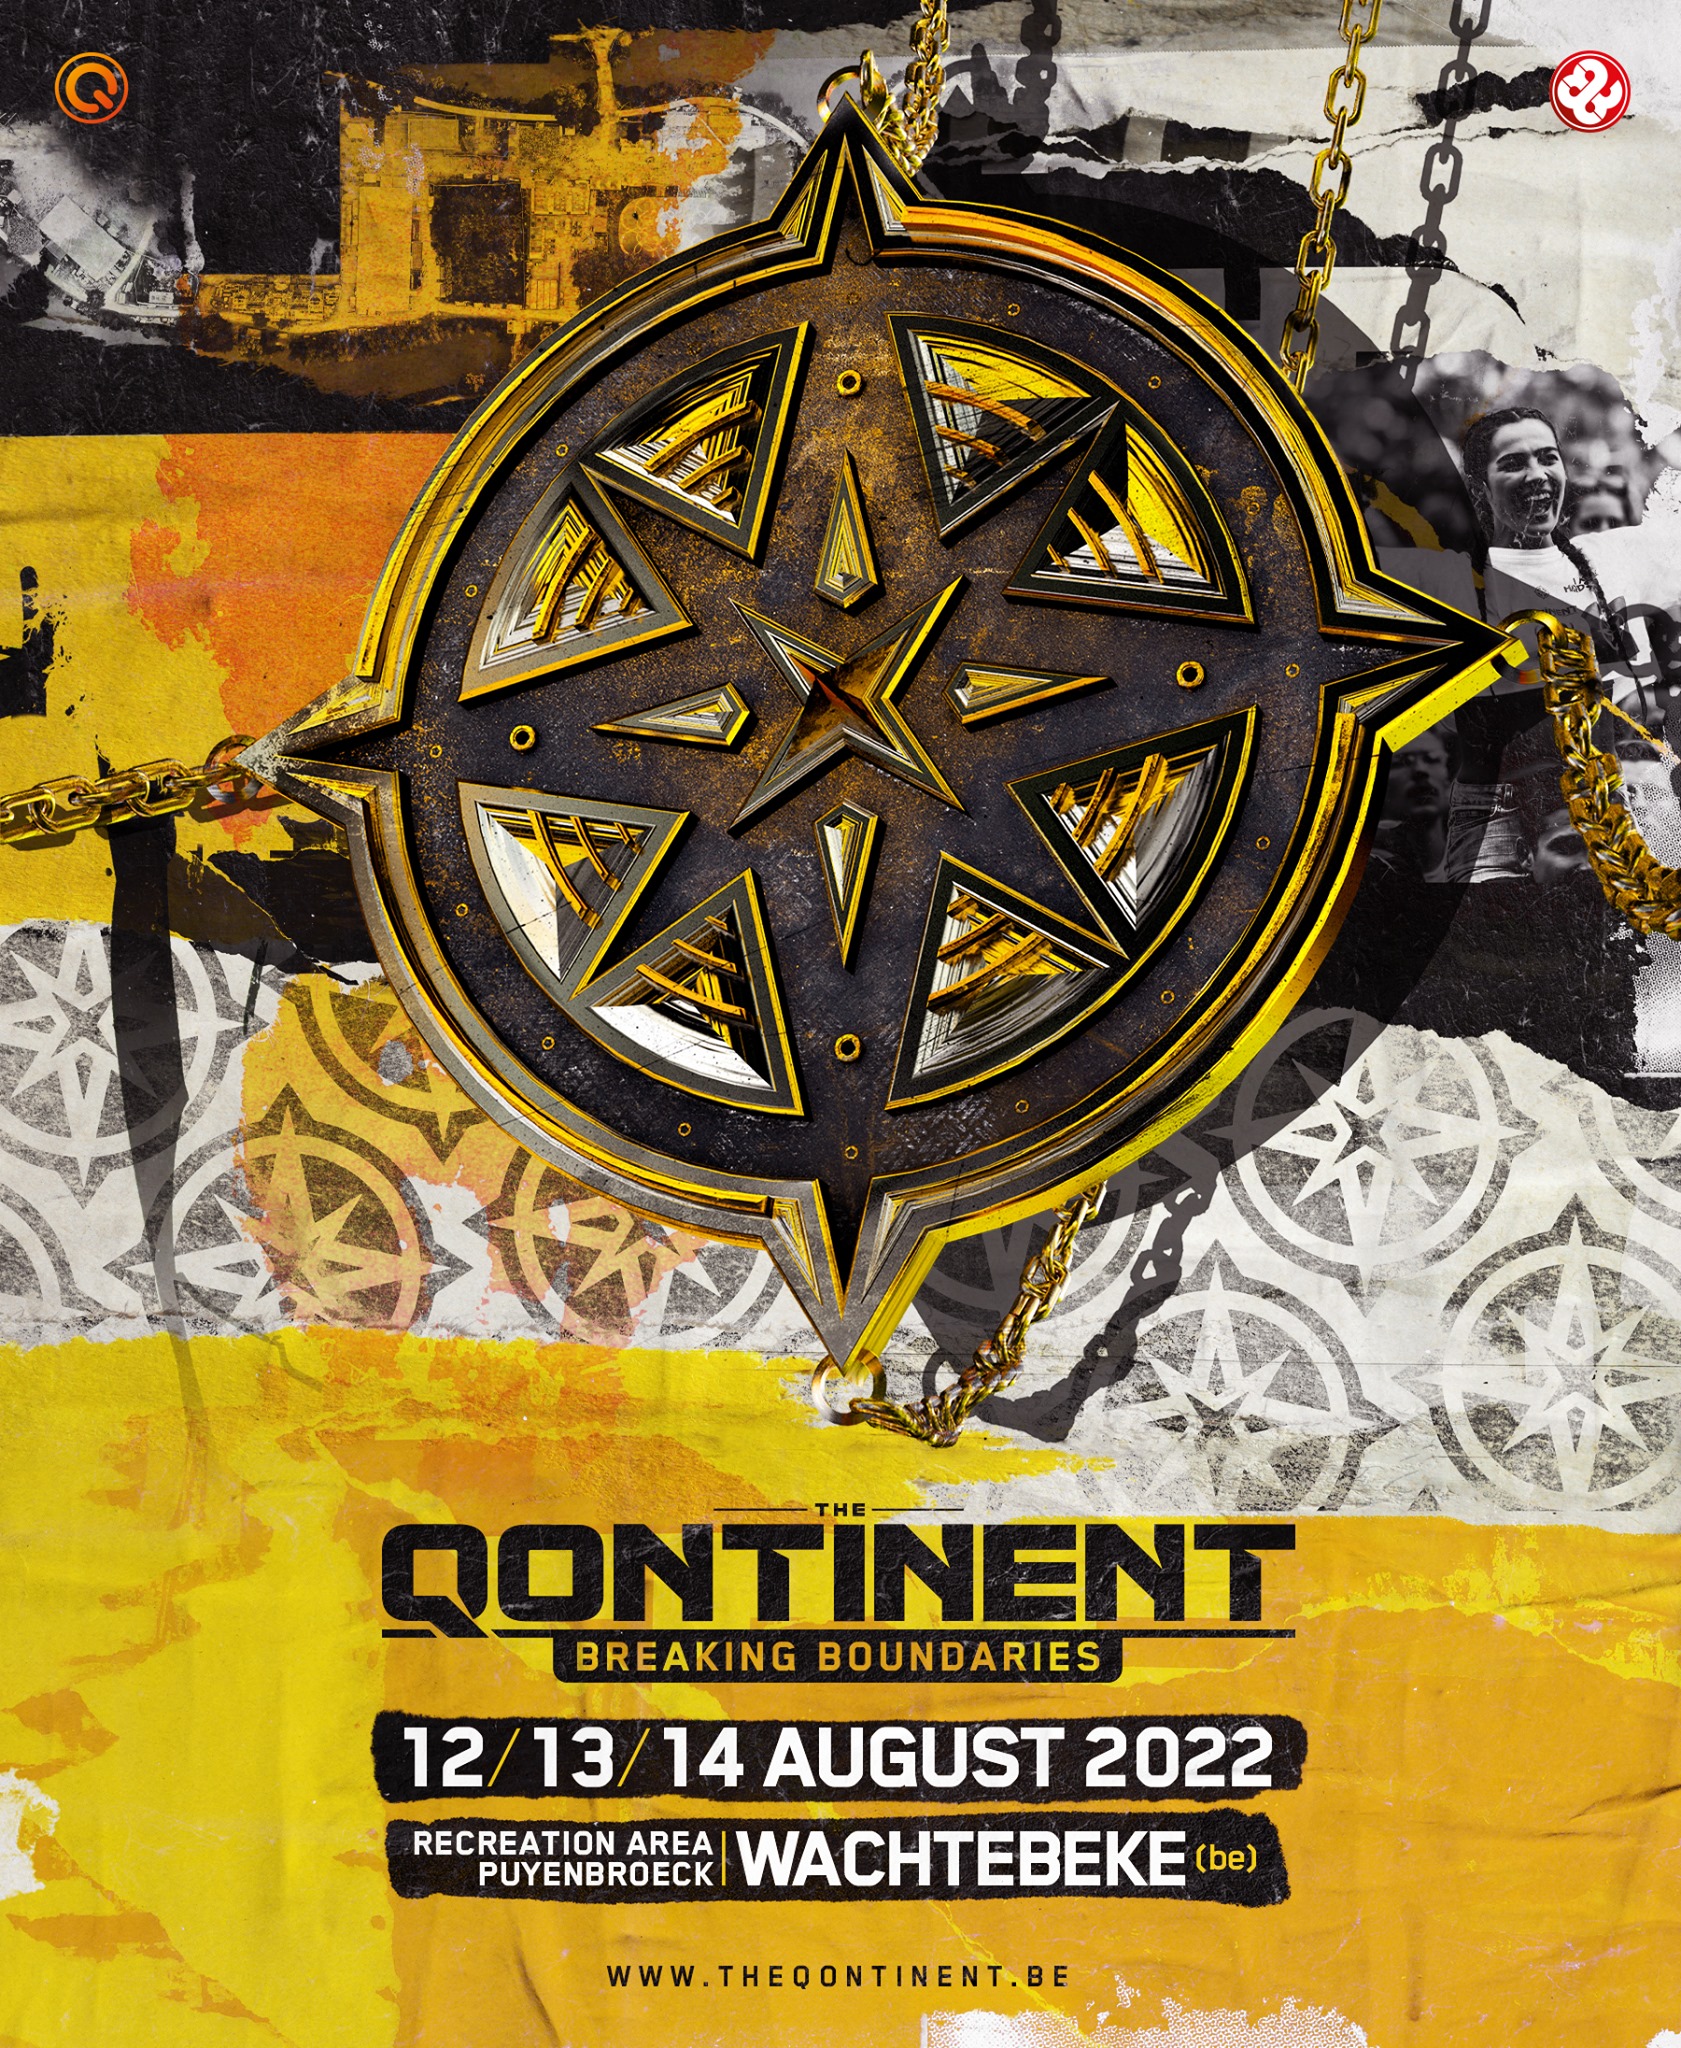 The Qontinent Weekend 2022